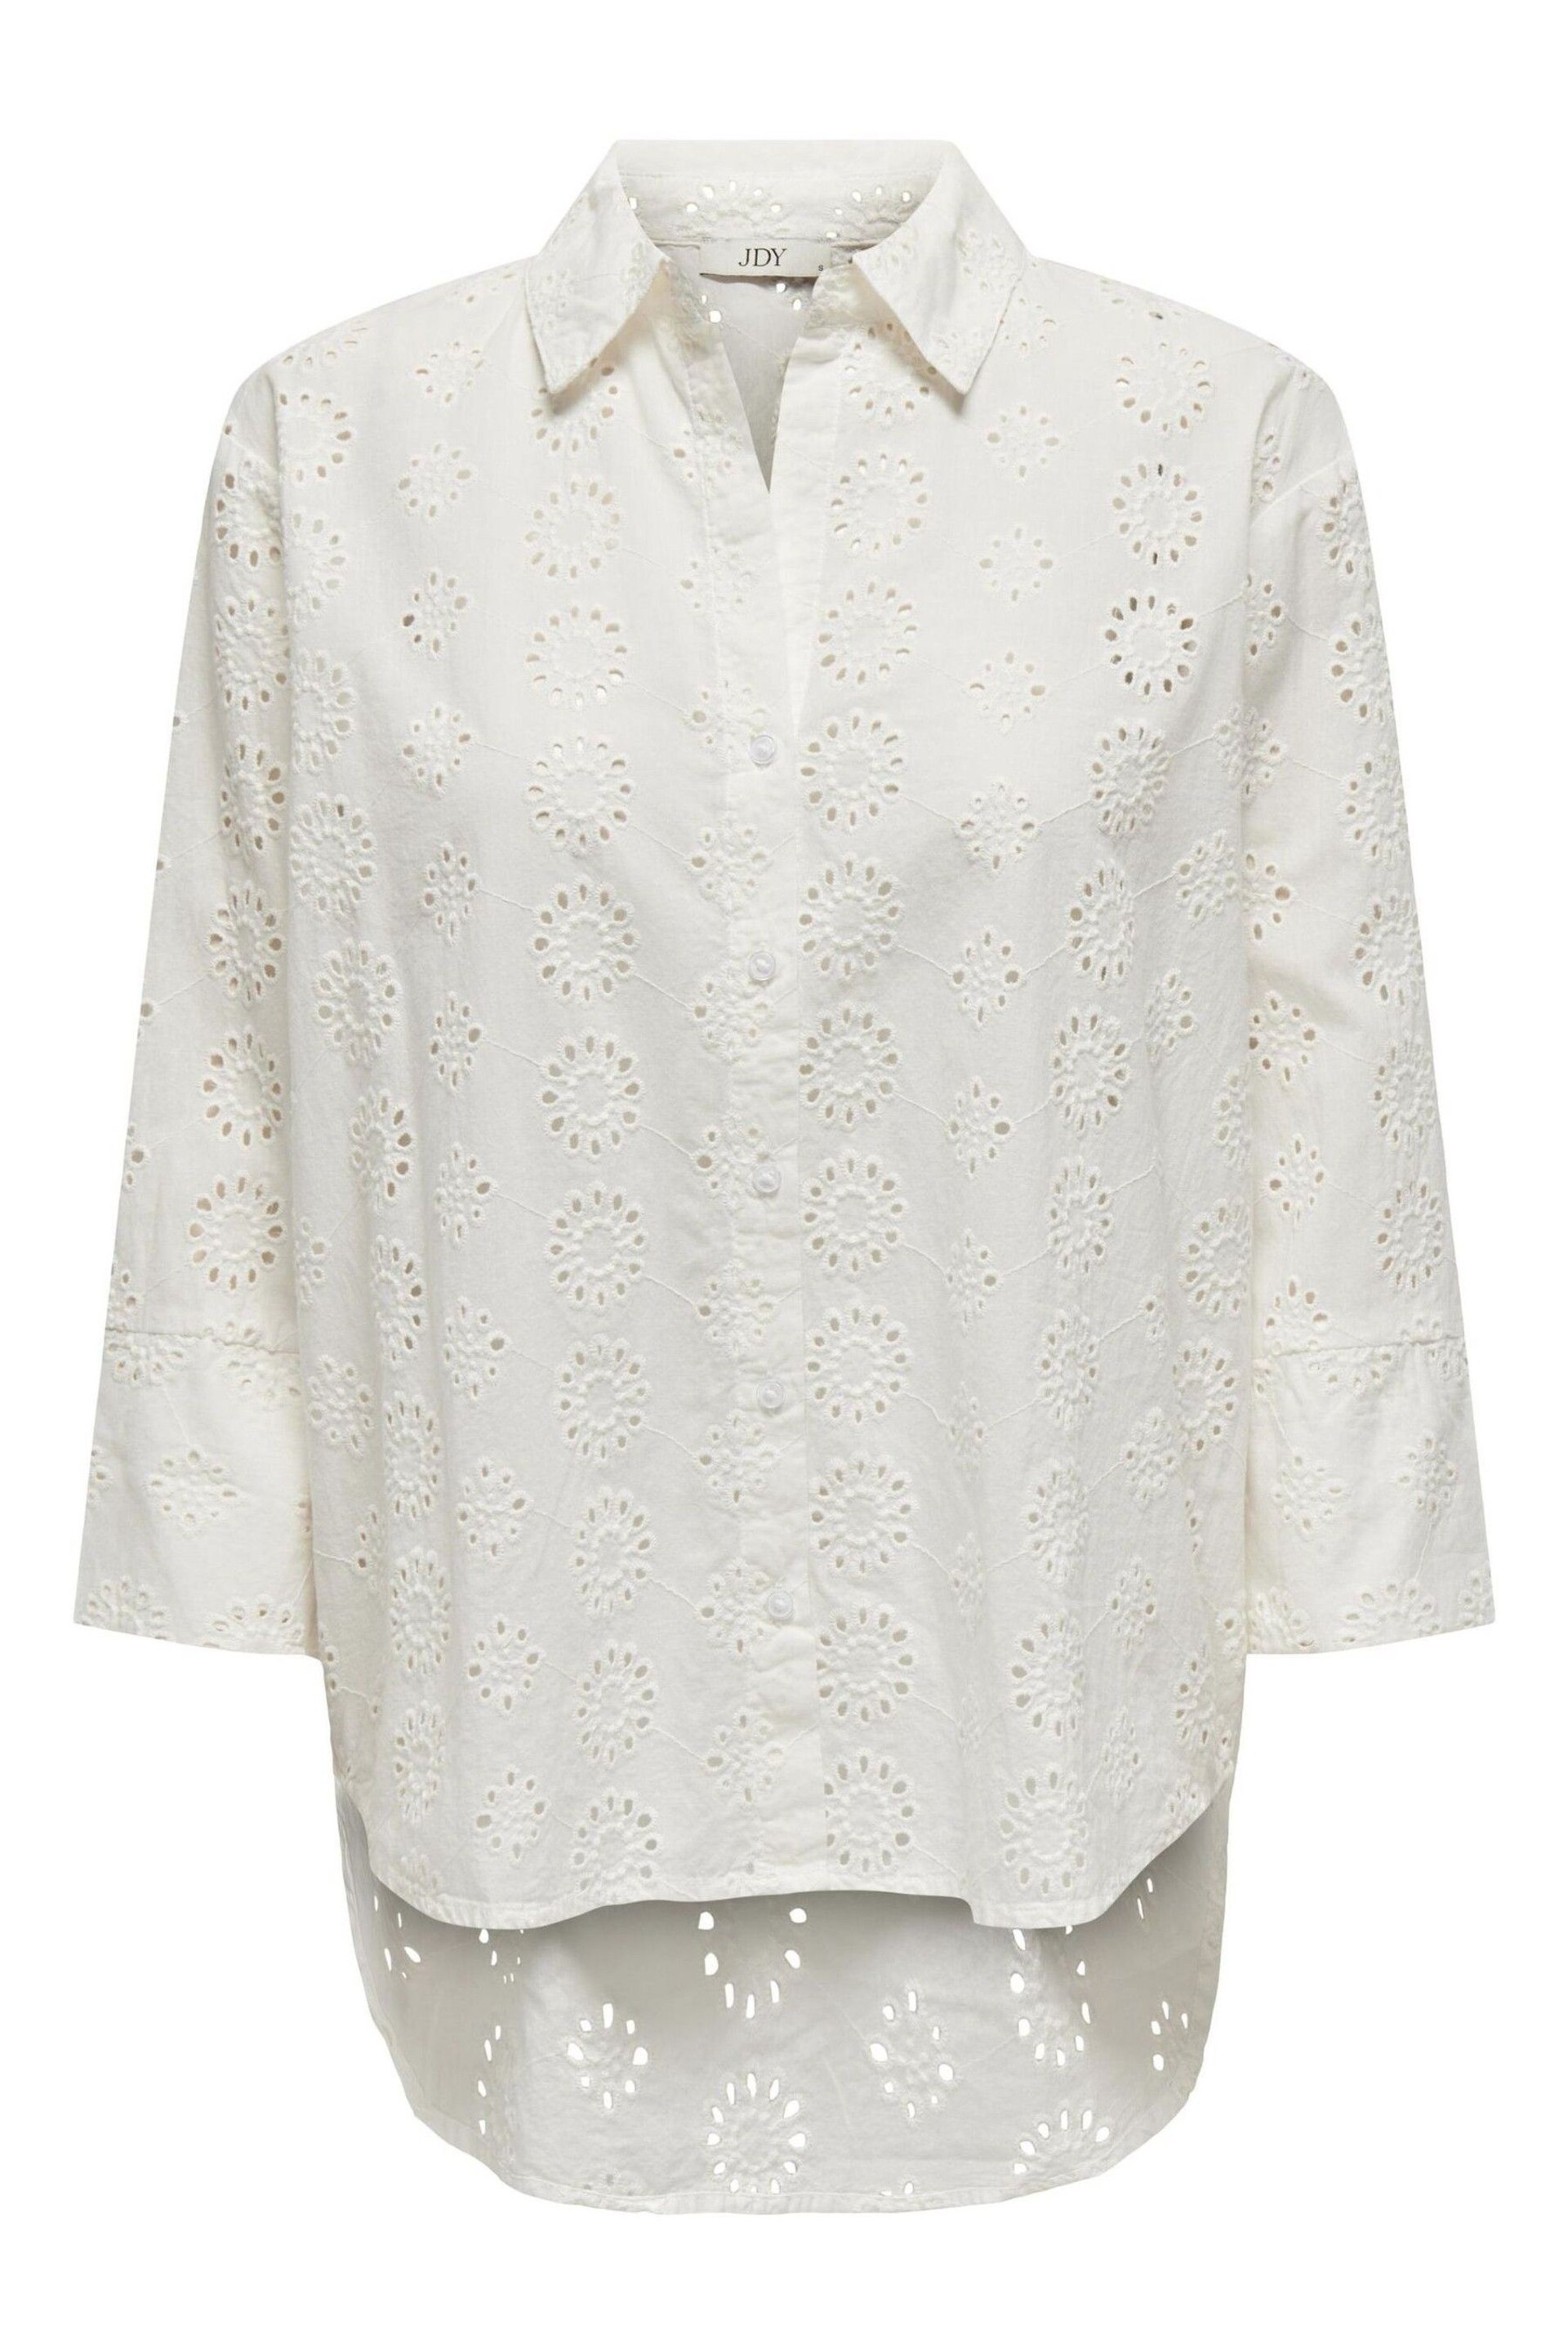 JDY White Broderie Relaxed Summer Shirt - Image 5 of 6